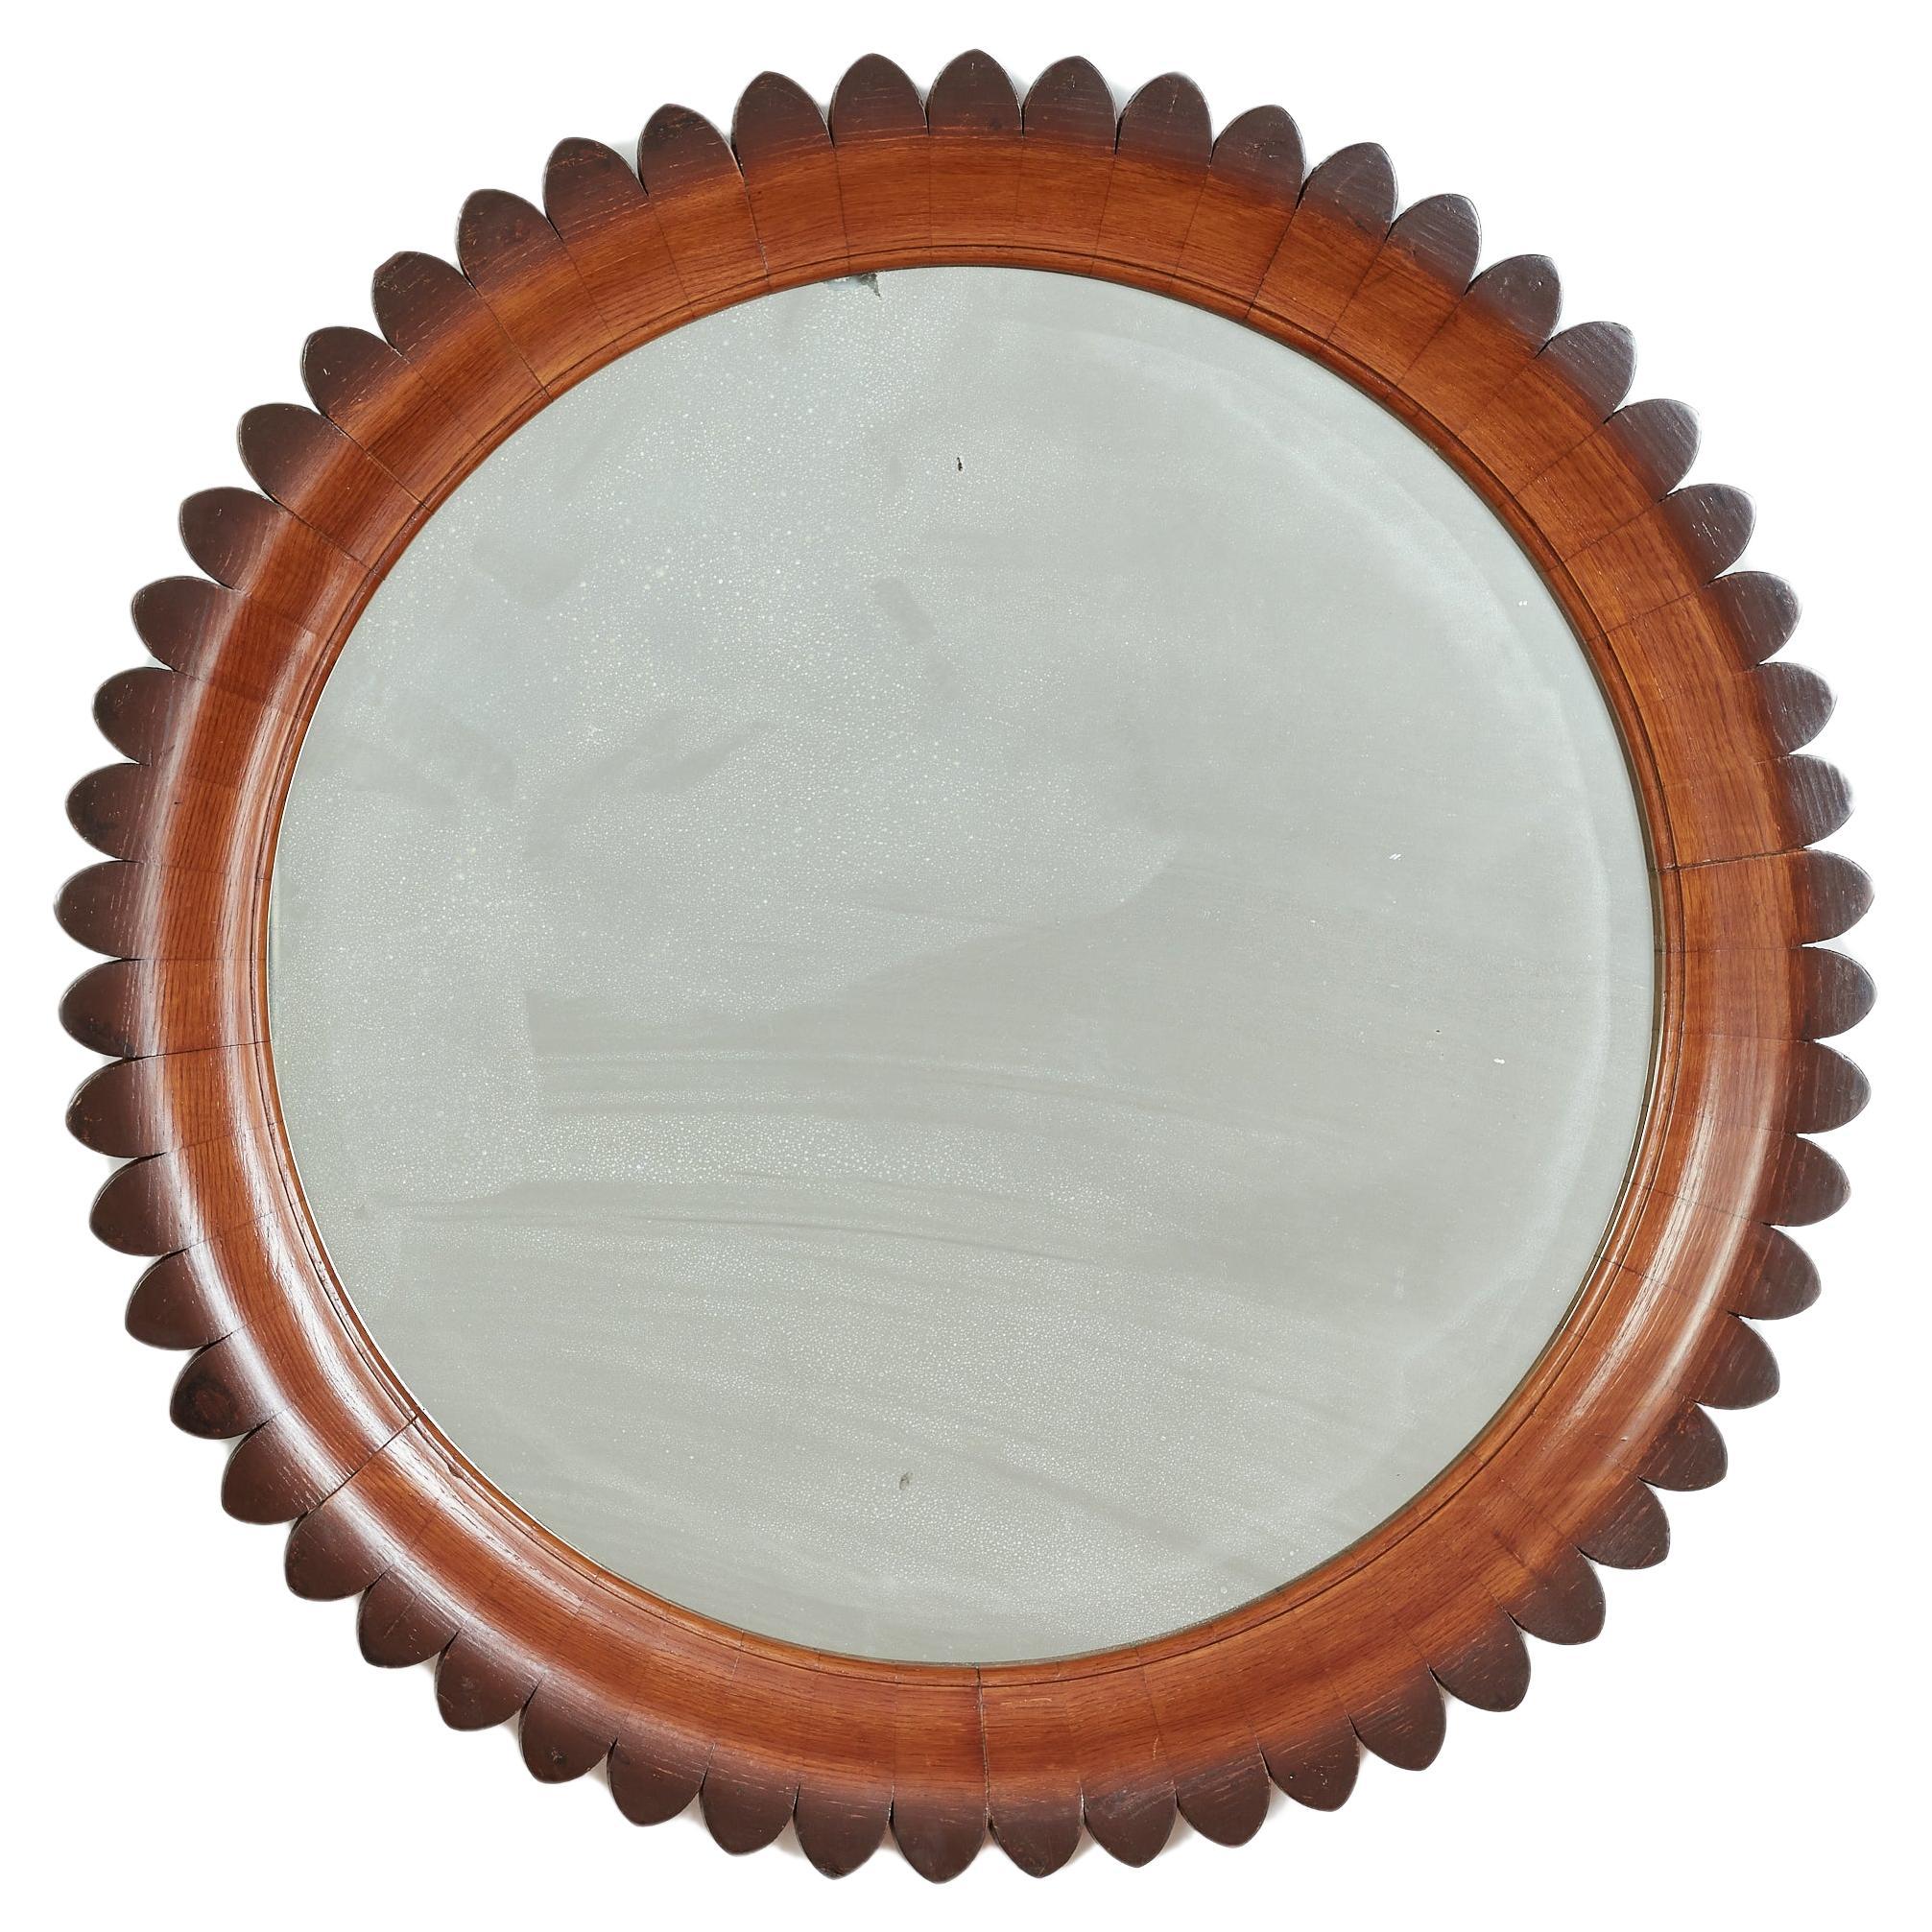 Exquisite mirror by Fratelli Marelli for Framar with hand carved  walnut scalloped frame. 
Original mirror 
Exquisite craftsmanship.

Italy 1940s.